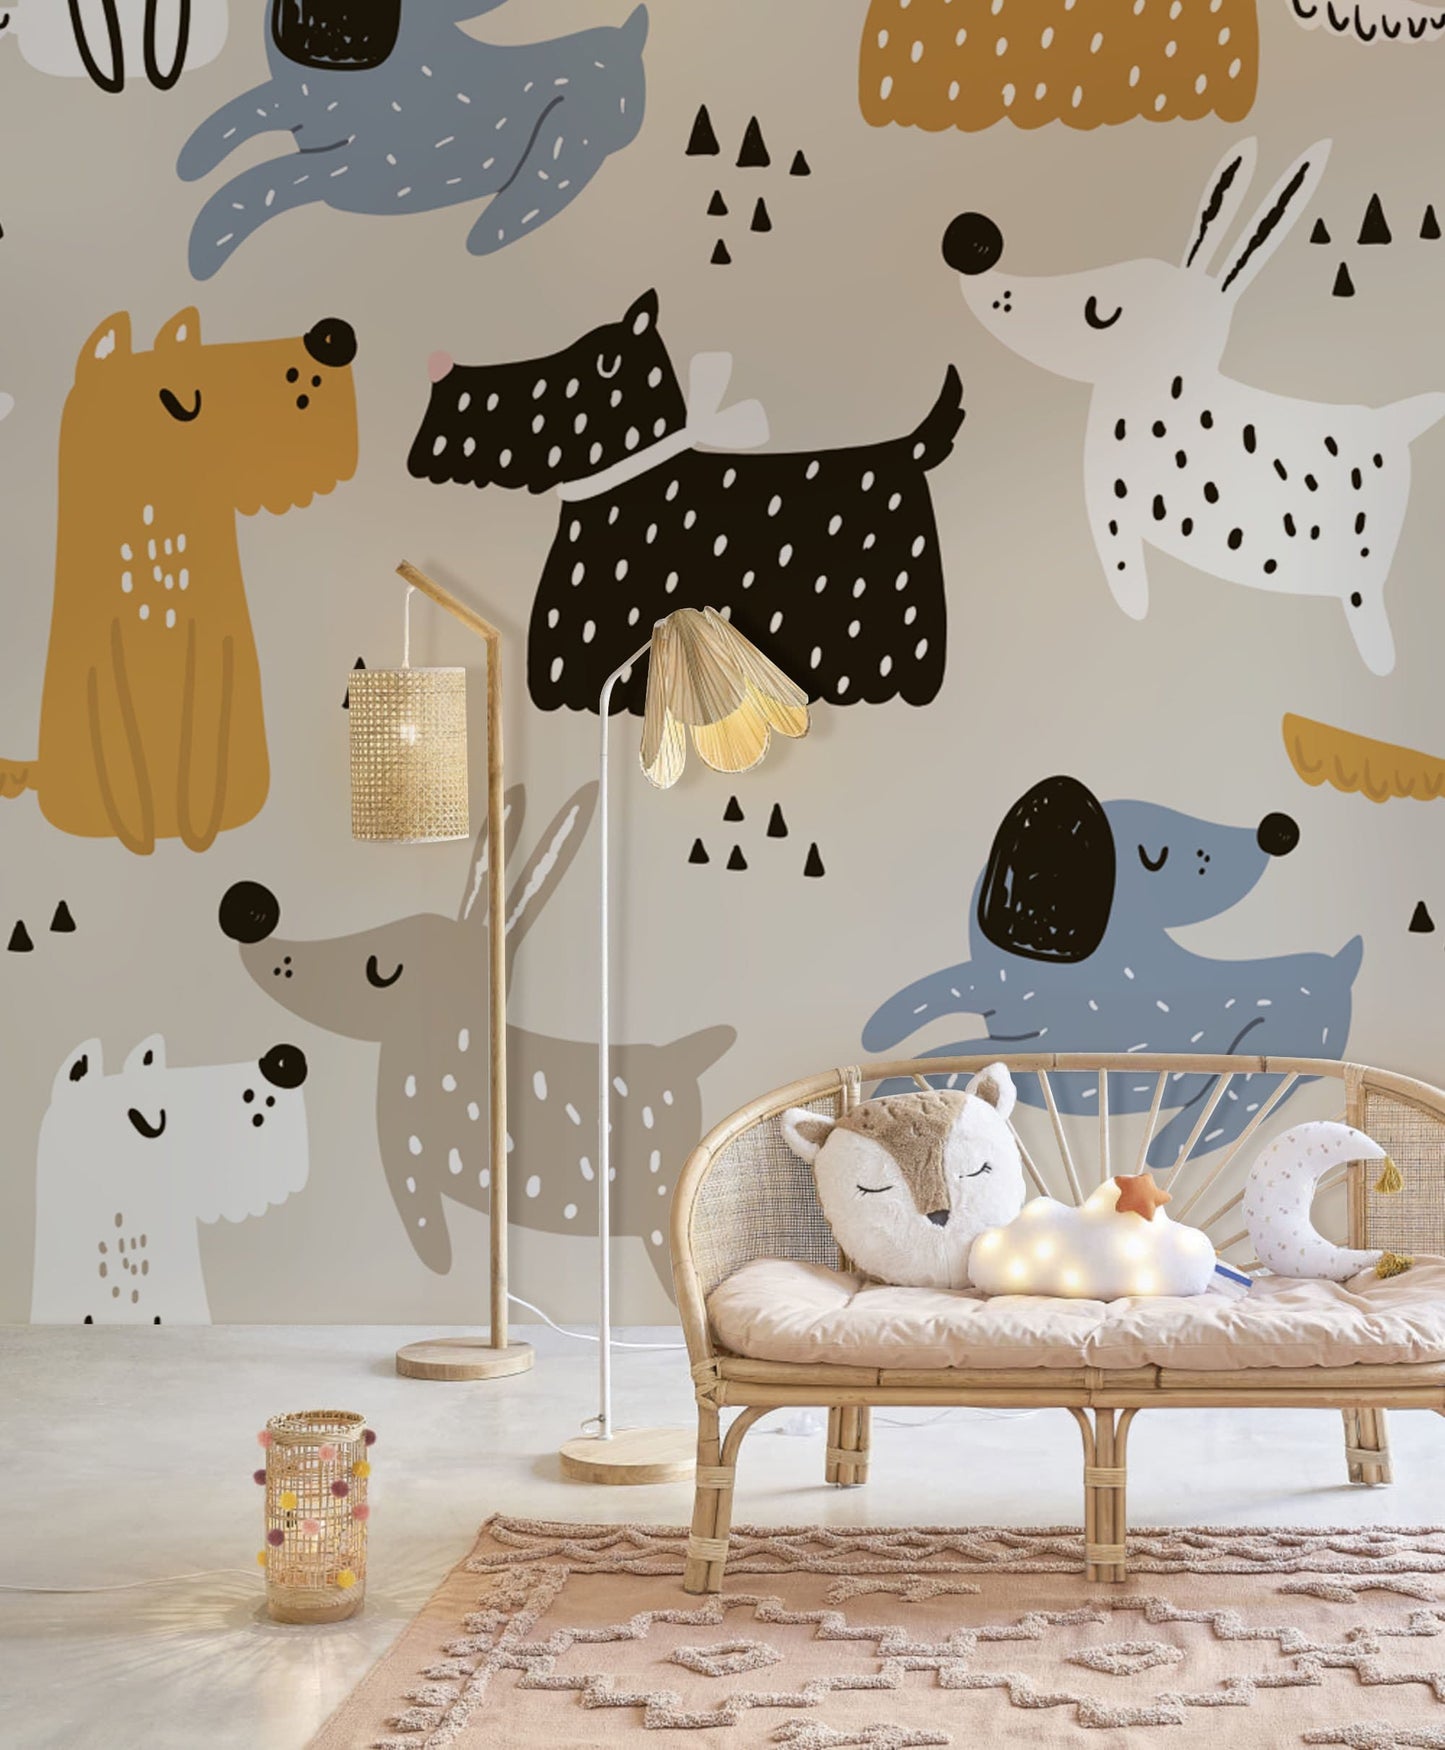 Wallpaper mural with a cartoon dog pattern, ideal for use in decorating a nursery.